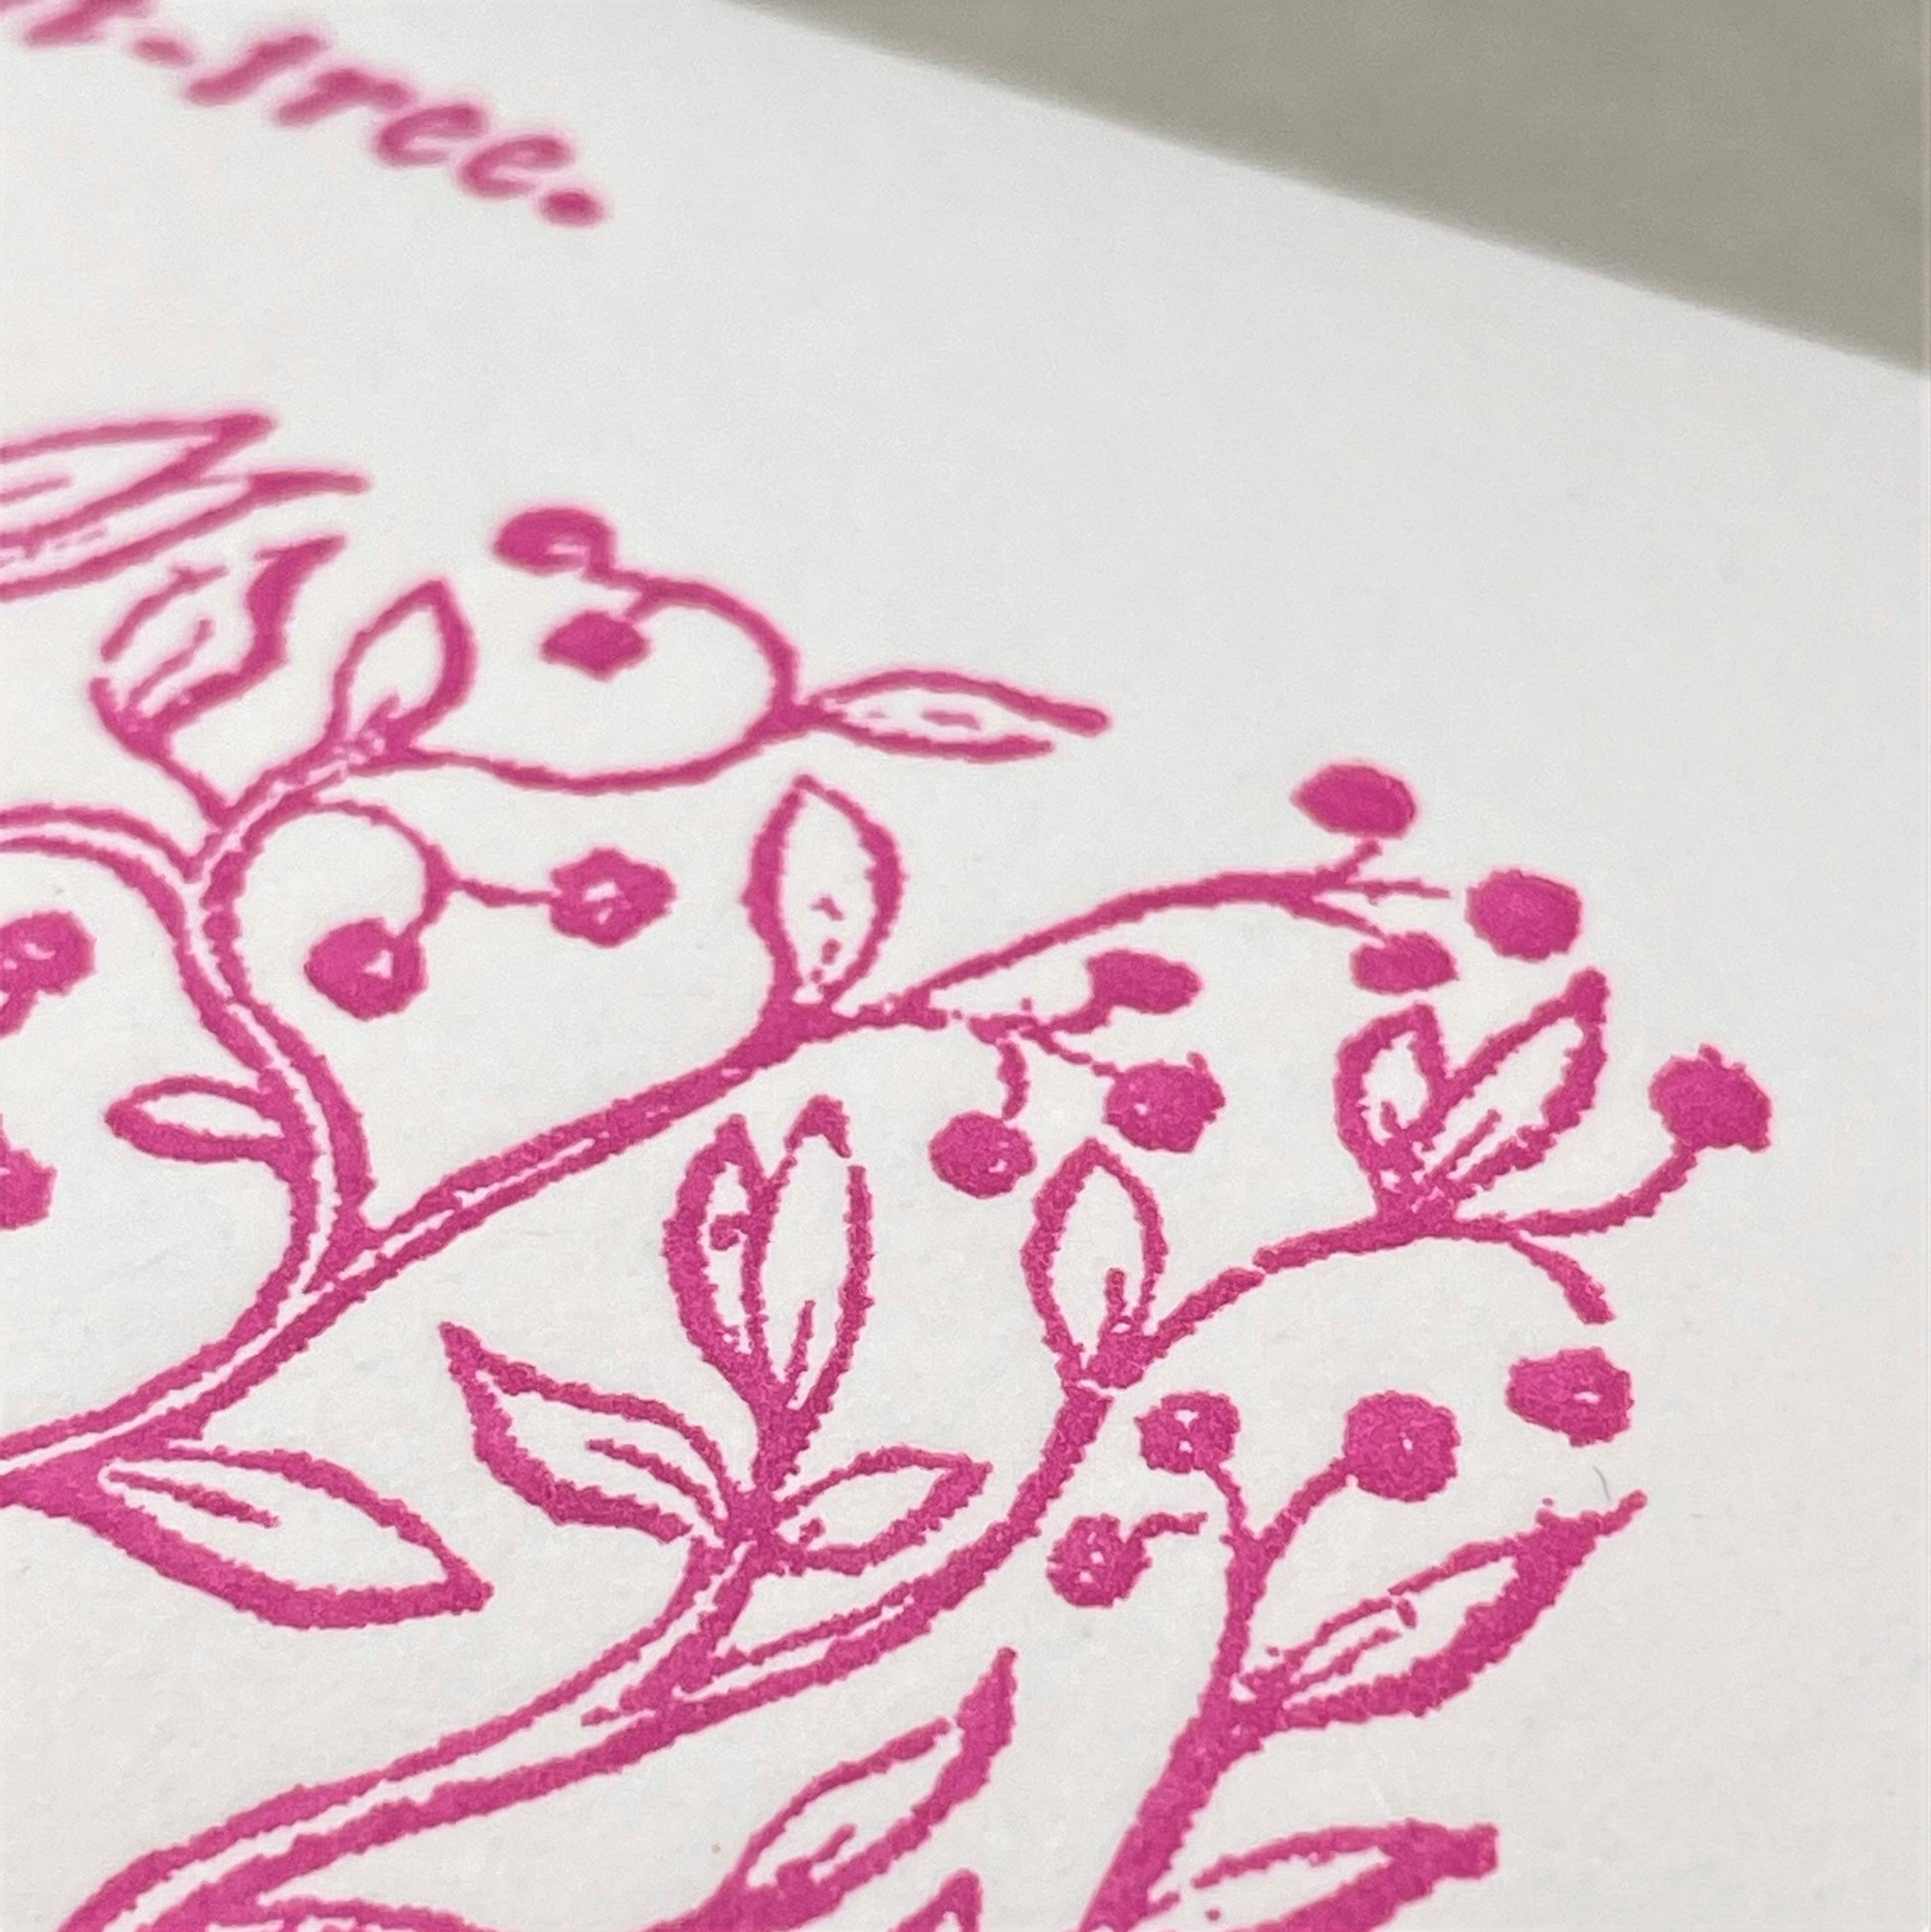 letterpress greetings card of a drawing of a fruit tree, pink ink on white, close-up